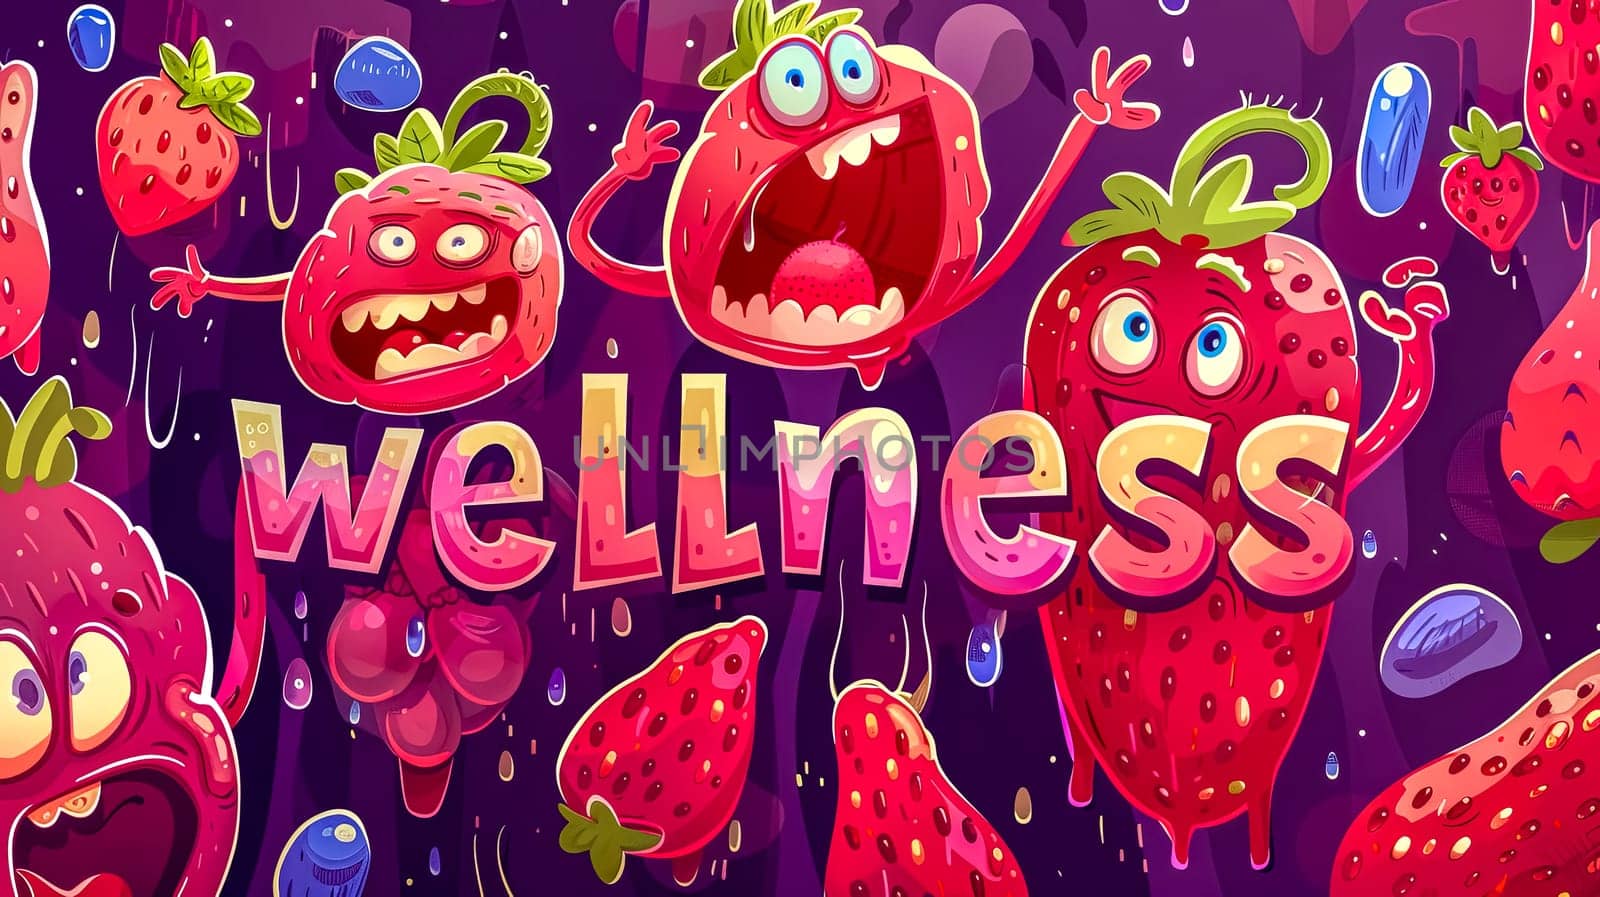 Vibrant wellness concept with cartoon strawberries by Edophoto